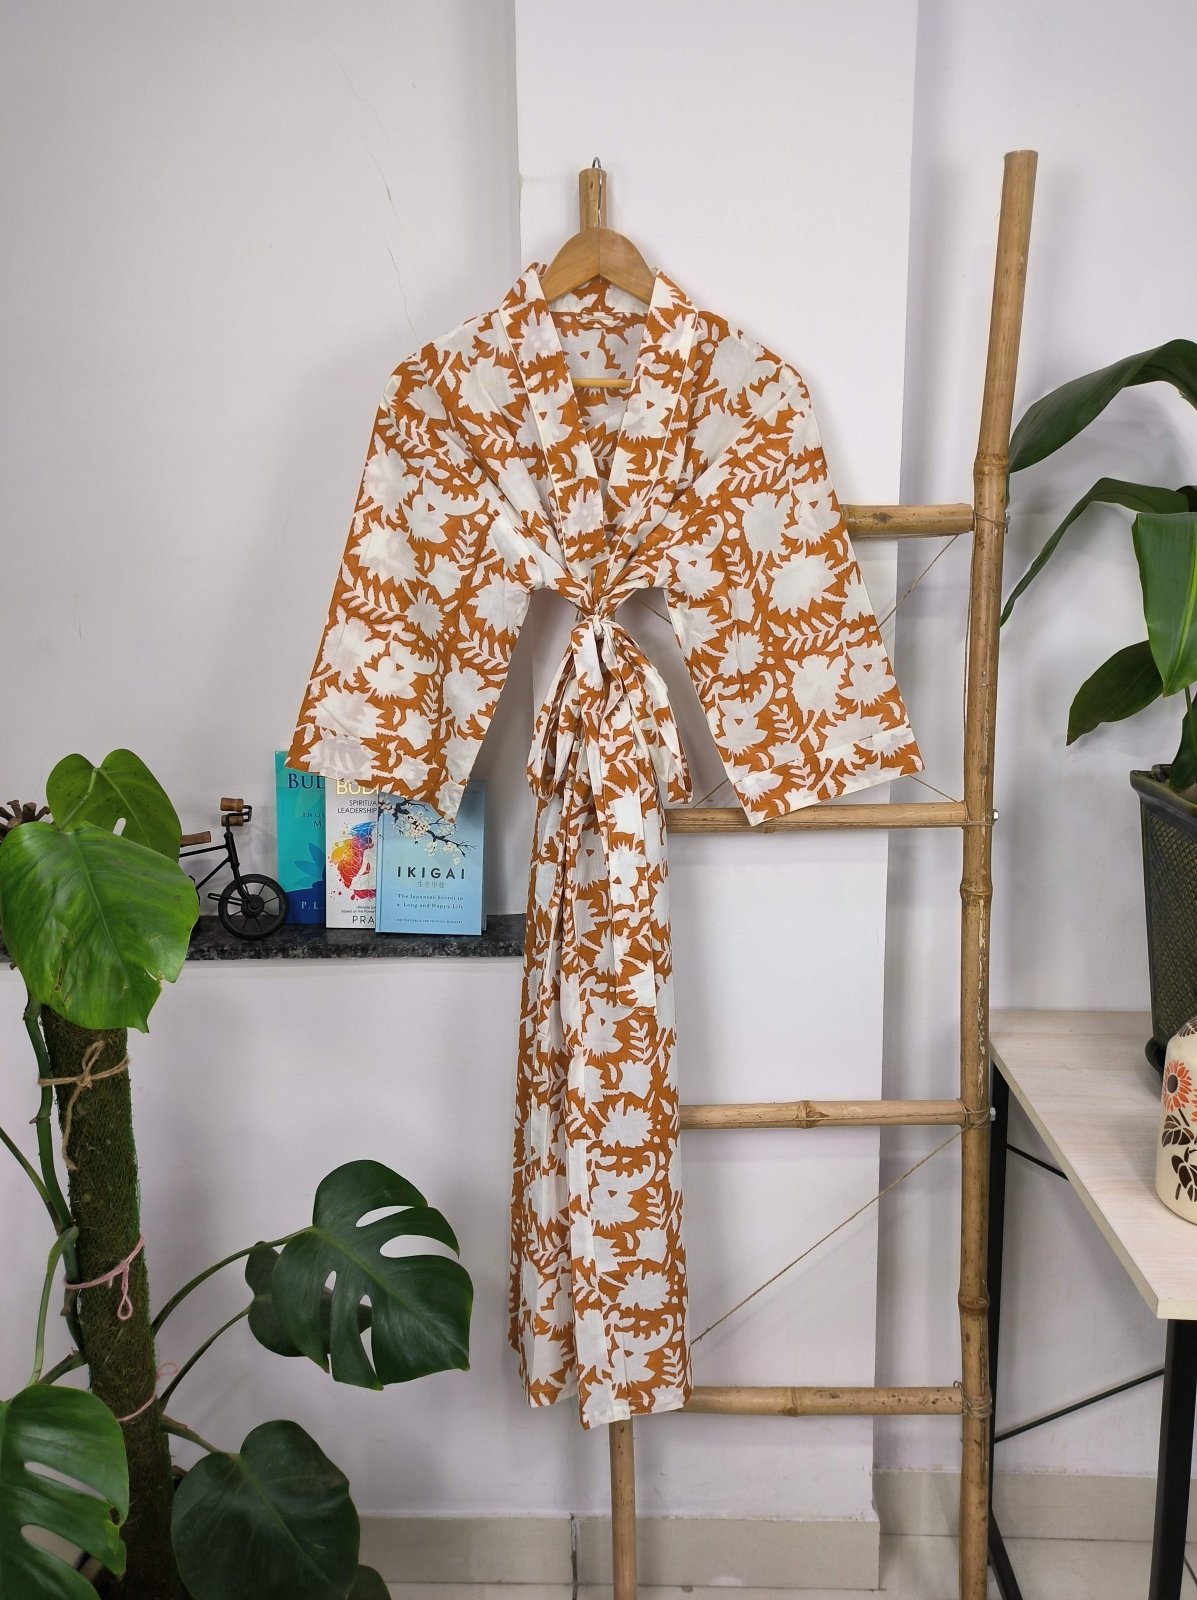 Boho Cotton Kimono House Robe Indian Handprinted Brown White Floral | Lightweight Summer Luxury Beach Holiday Cover Up Stunning Dress - The Eastern Loom